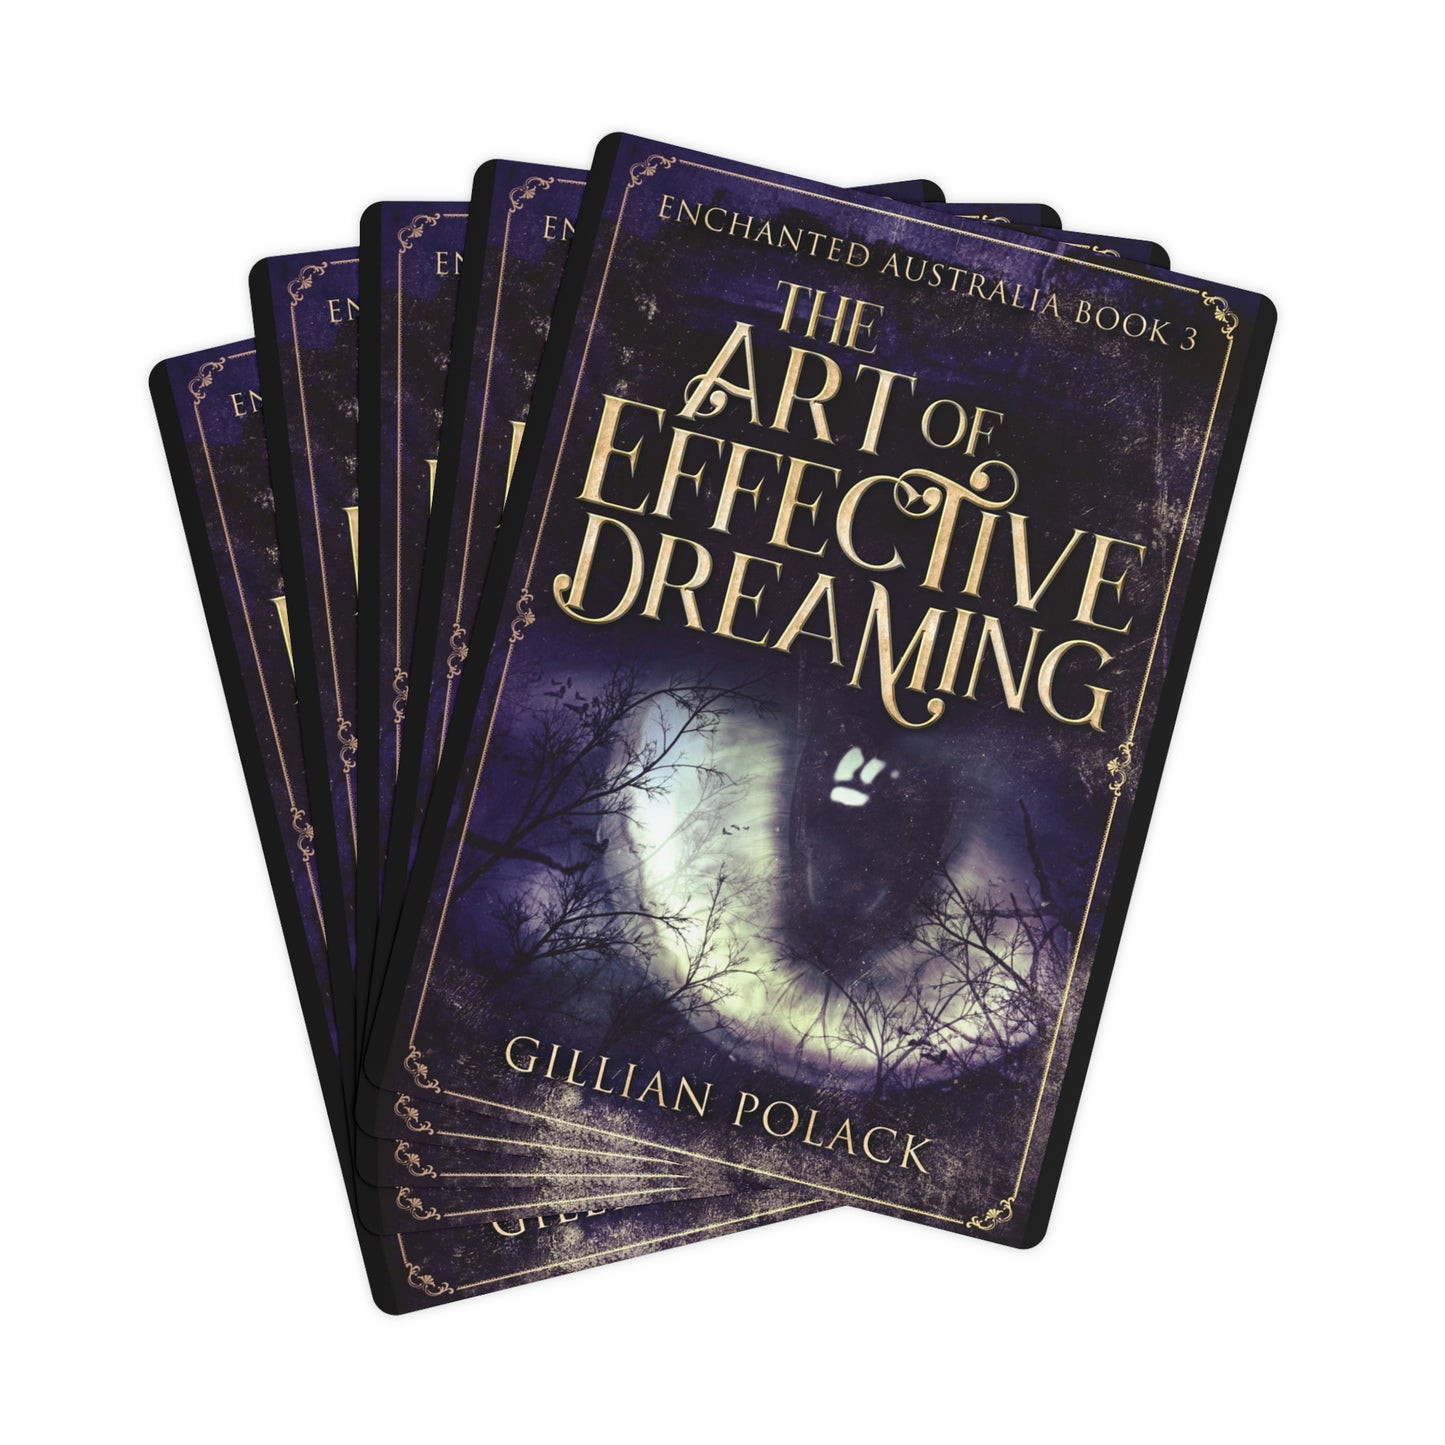 The Art of Effective Dreaming - Playing Cards